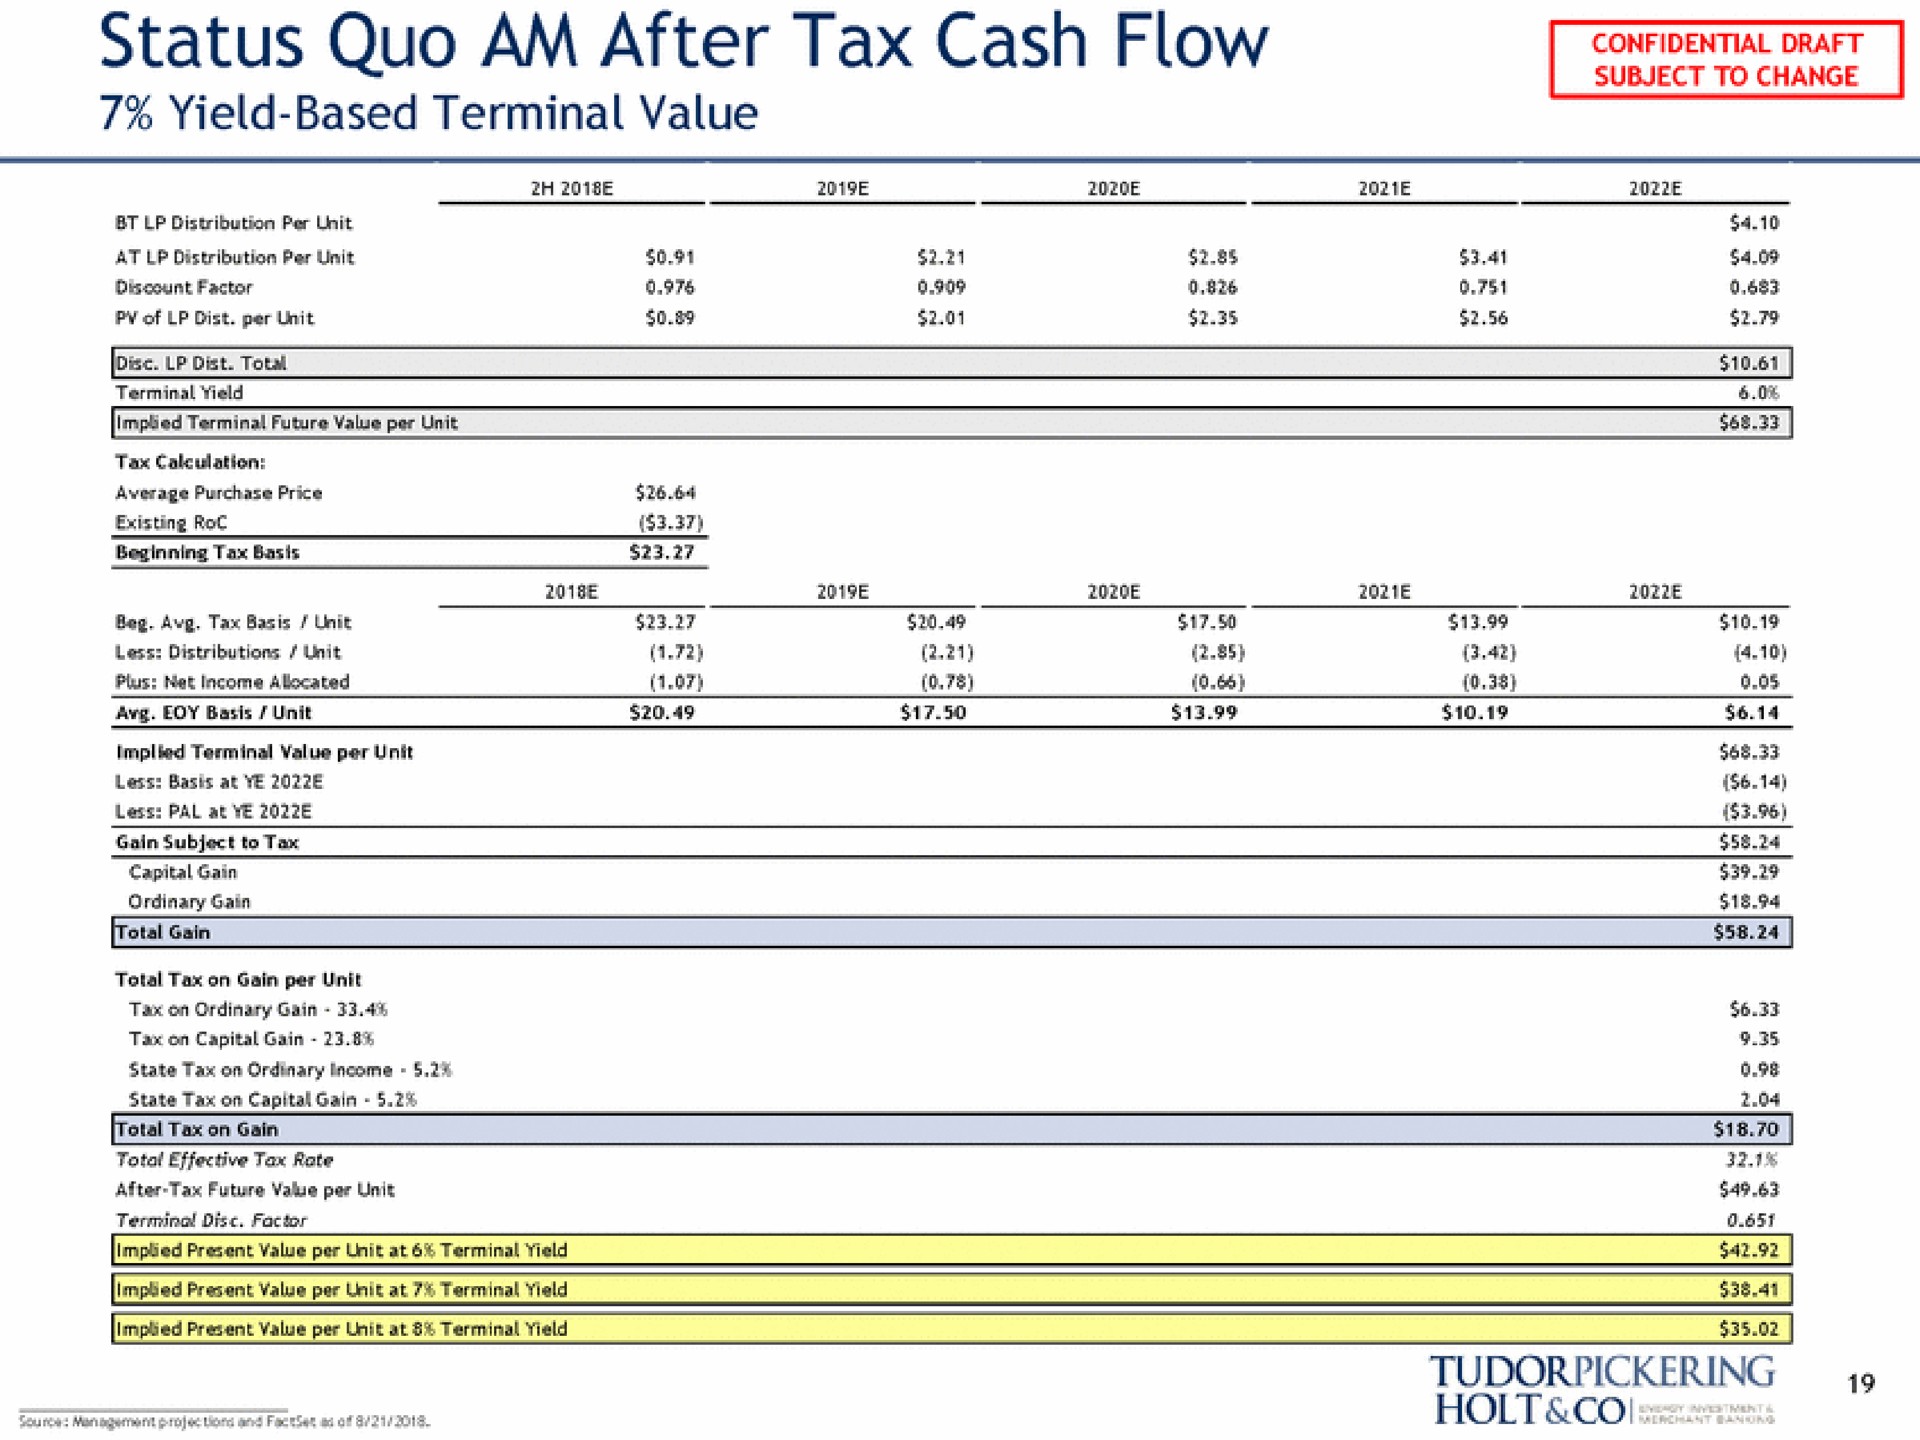 status quo am after tax cash flow yield based terminal value | Tudor, Pickering, Holt & Co